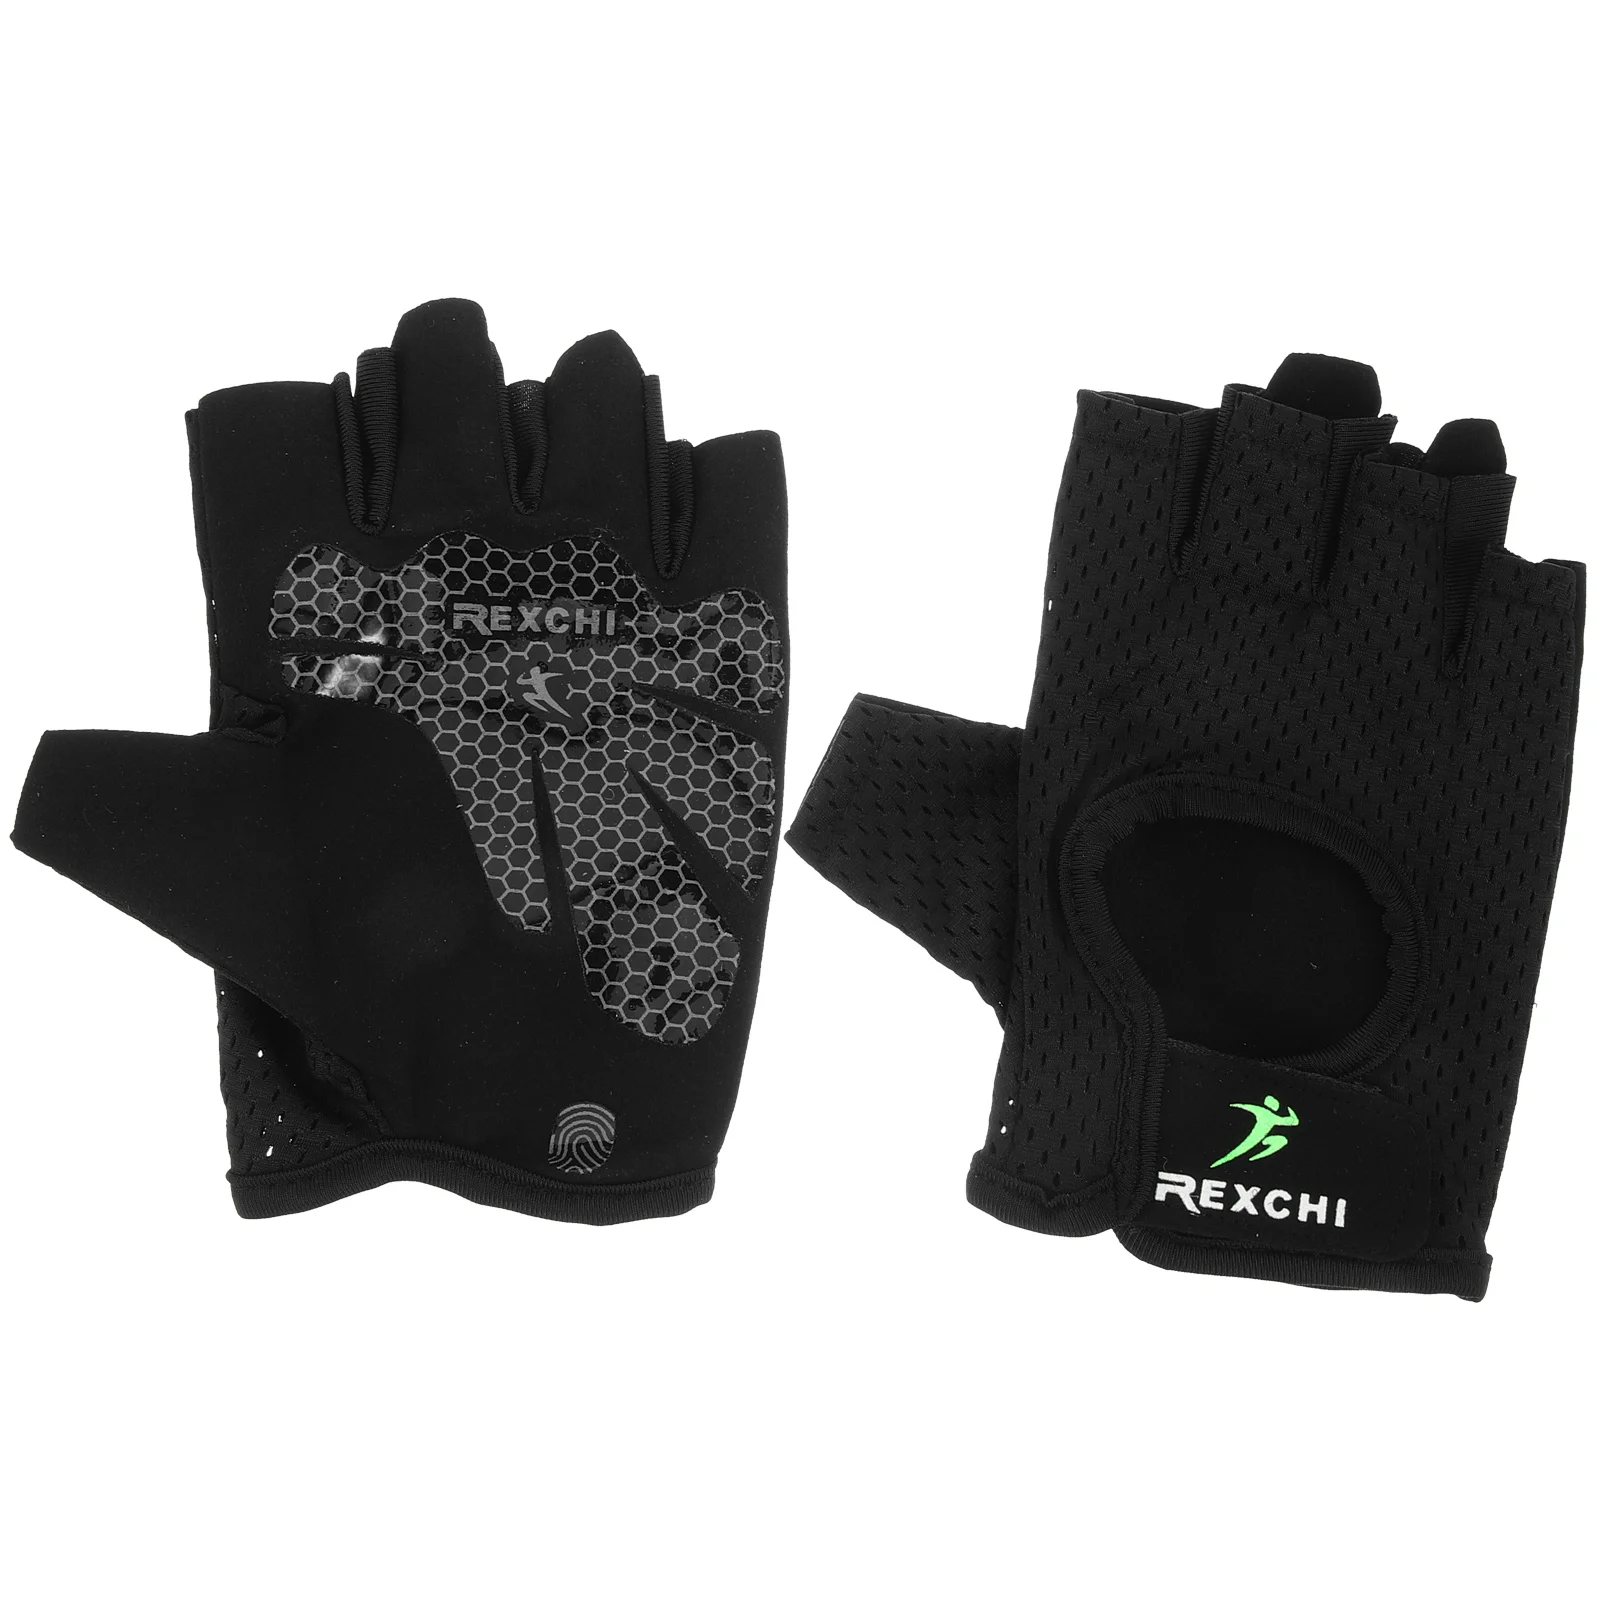 

1Pair MTB Riding Gloves Bicycling Mitten Mountain Bike Skid-proof Gloves Outdoor Riding Gloves M (Black)